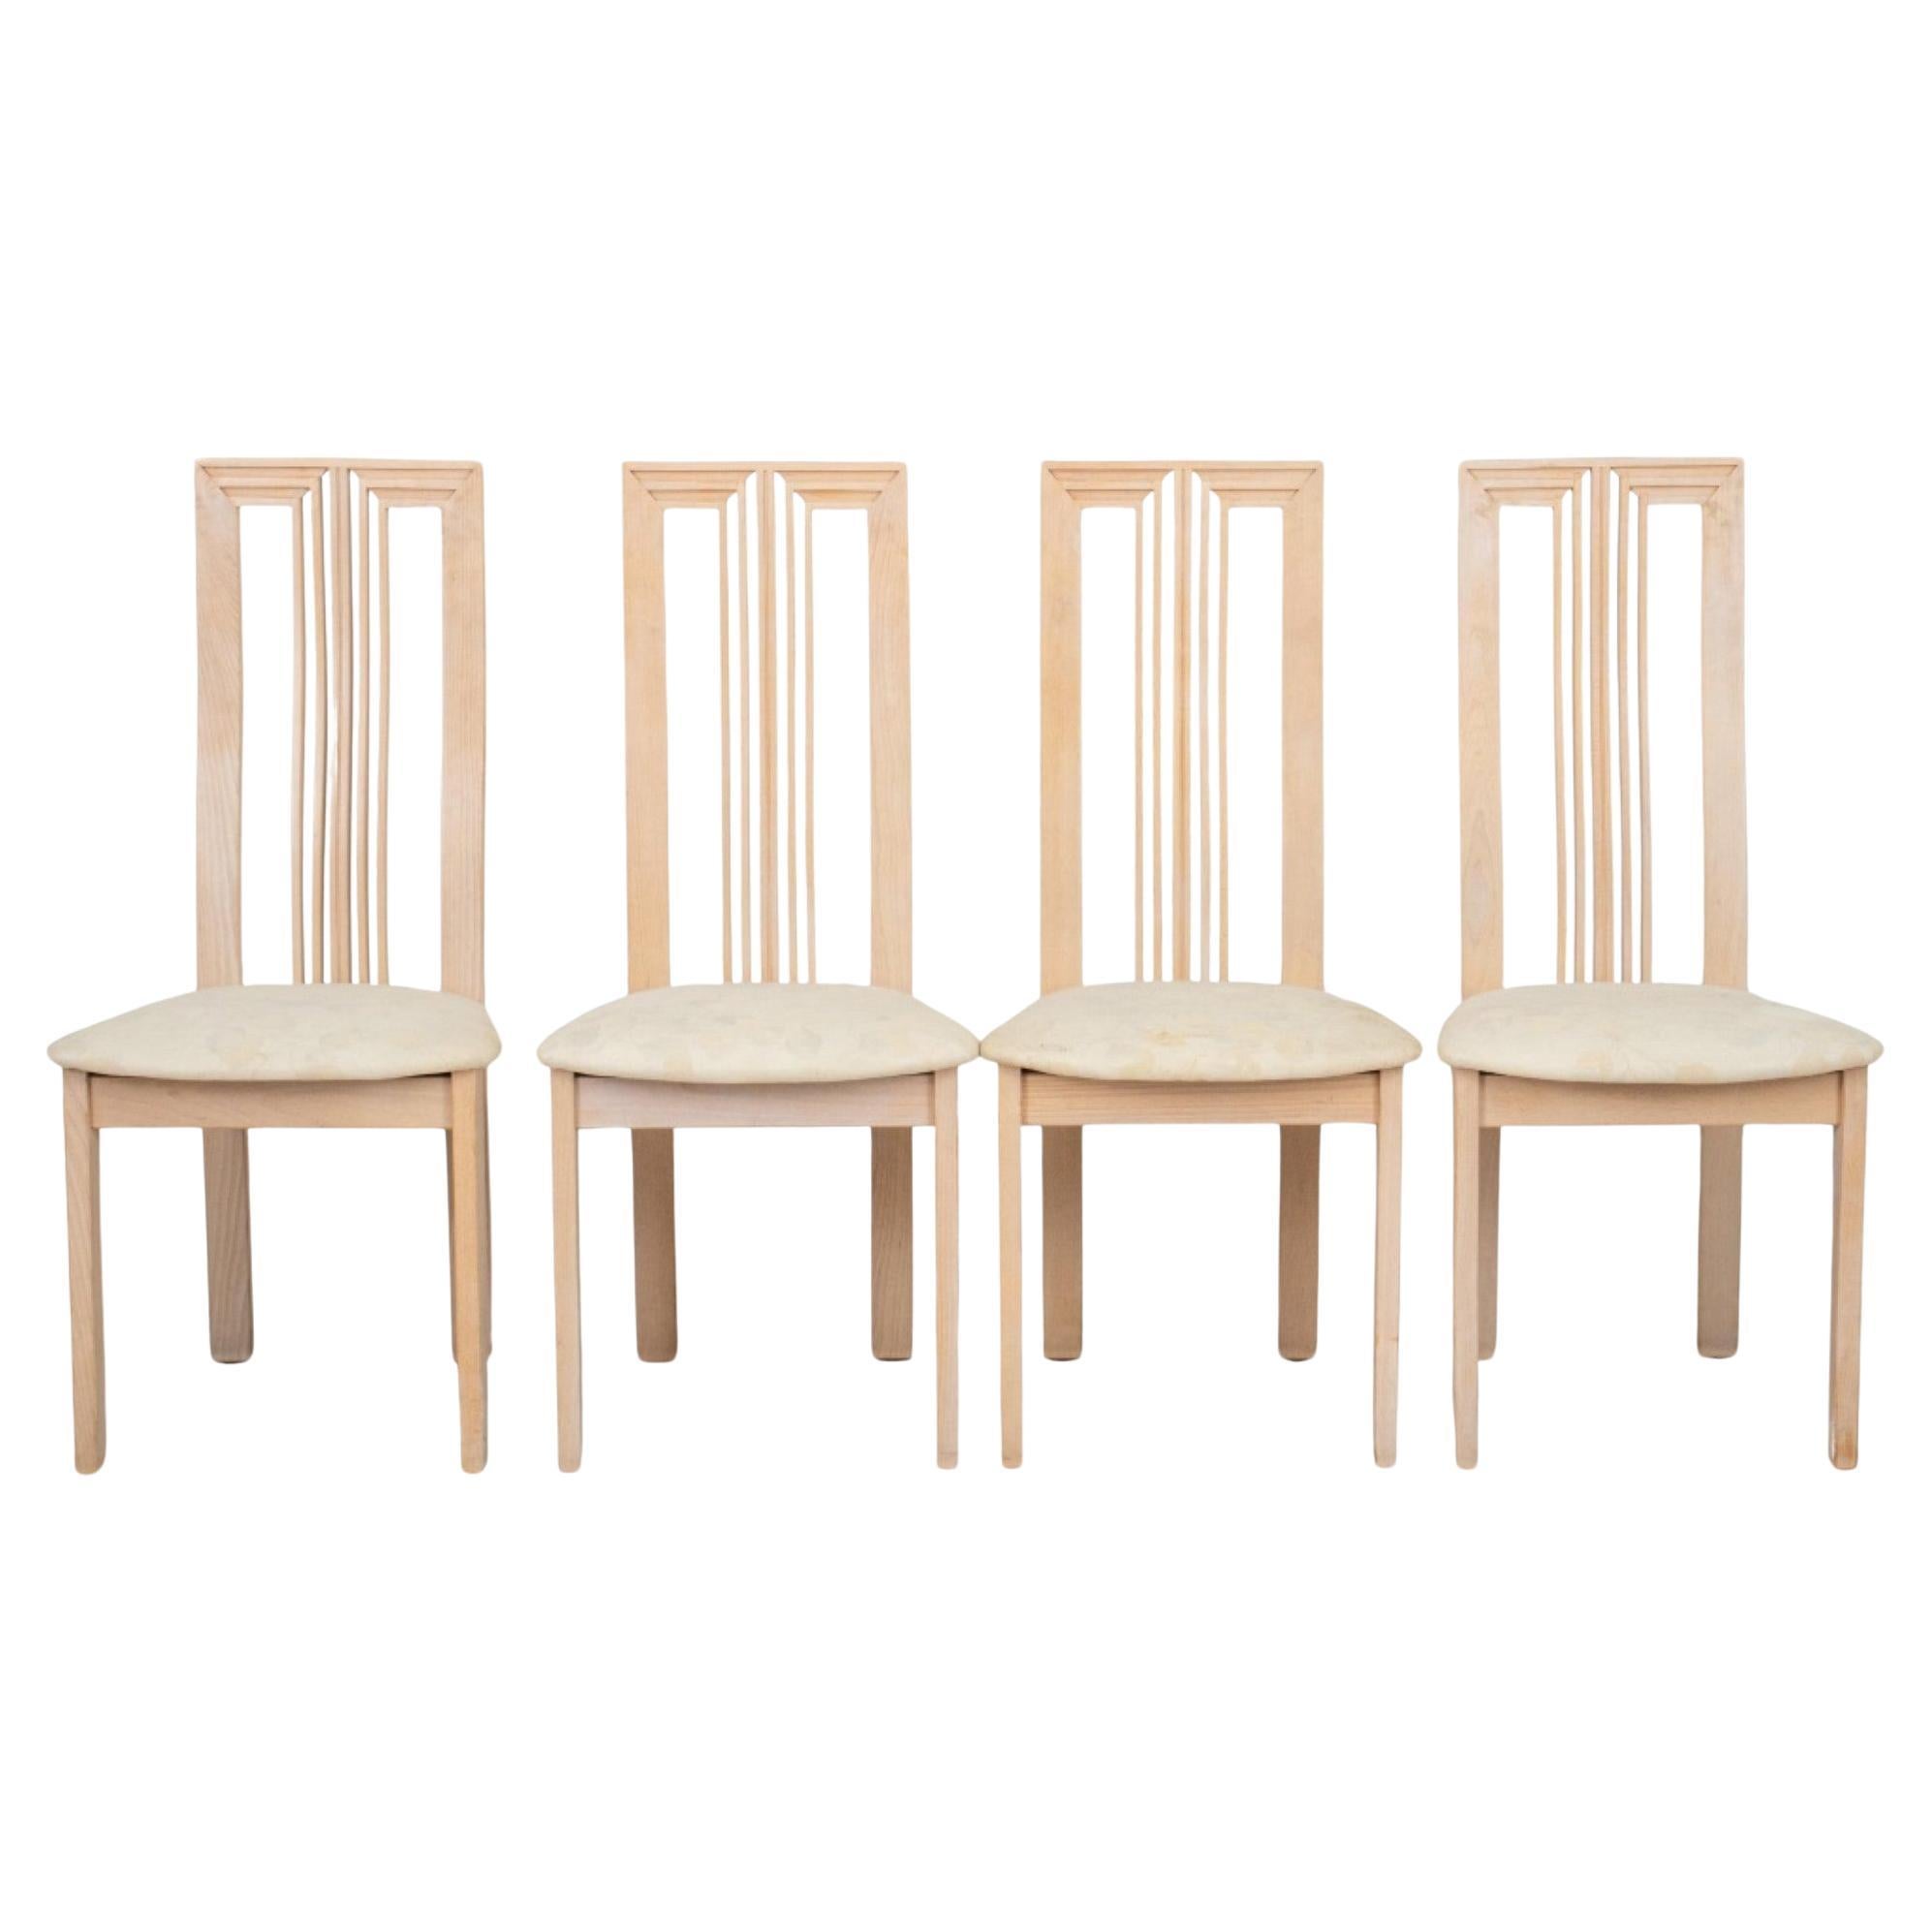 Post Modern Cerused Wood Tall Back Chairs, 4